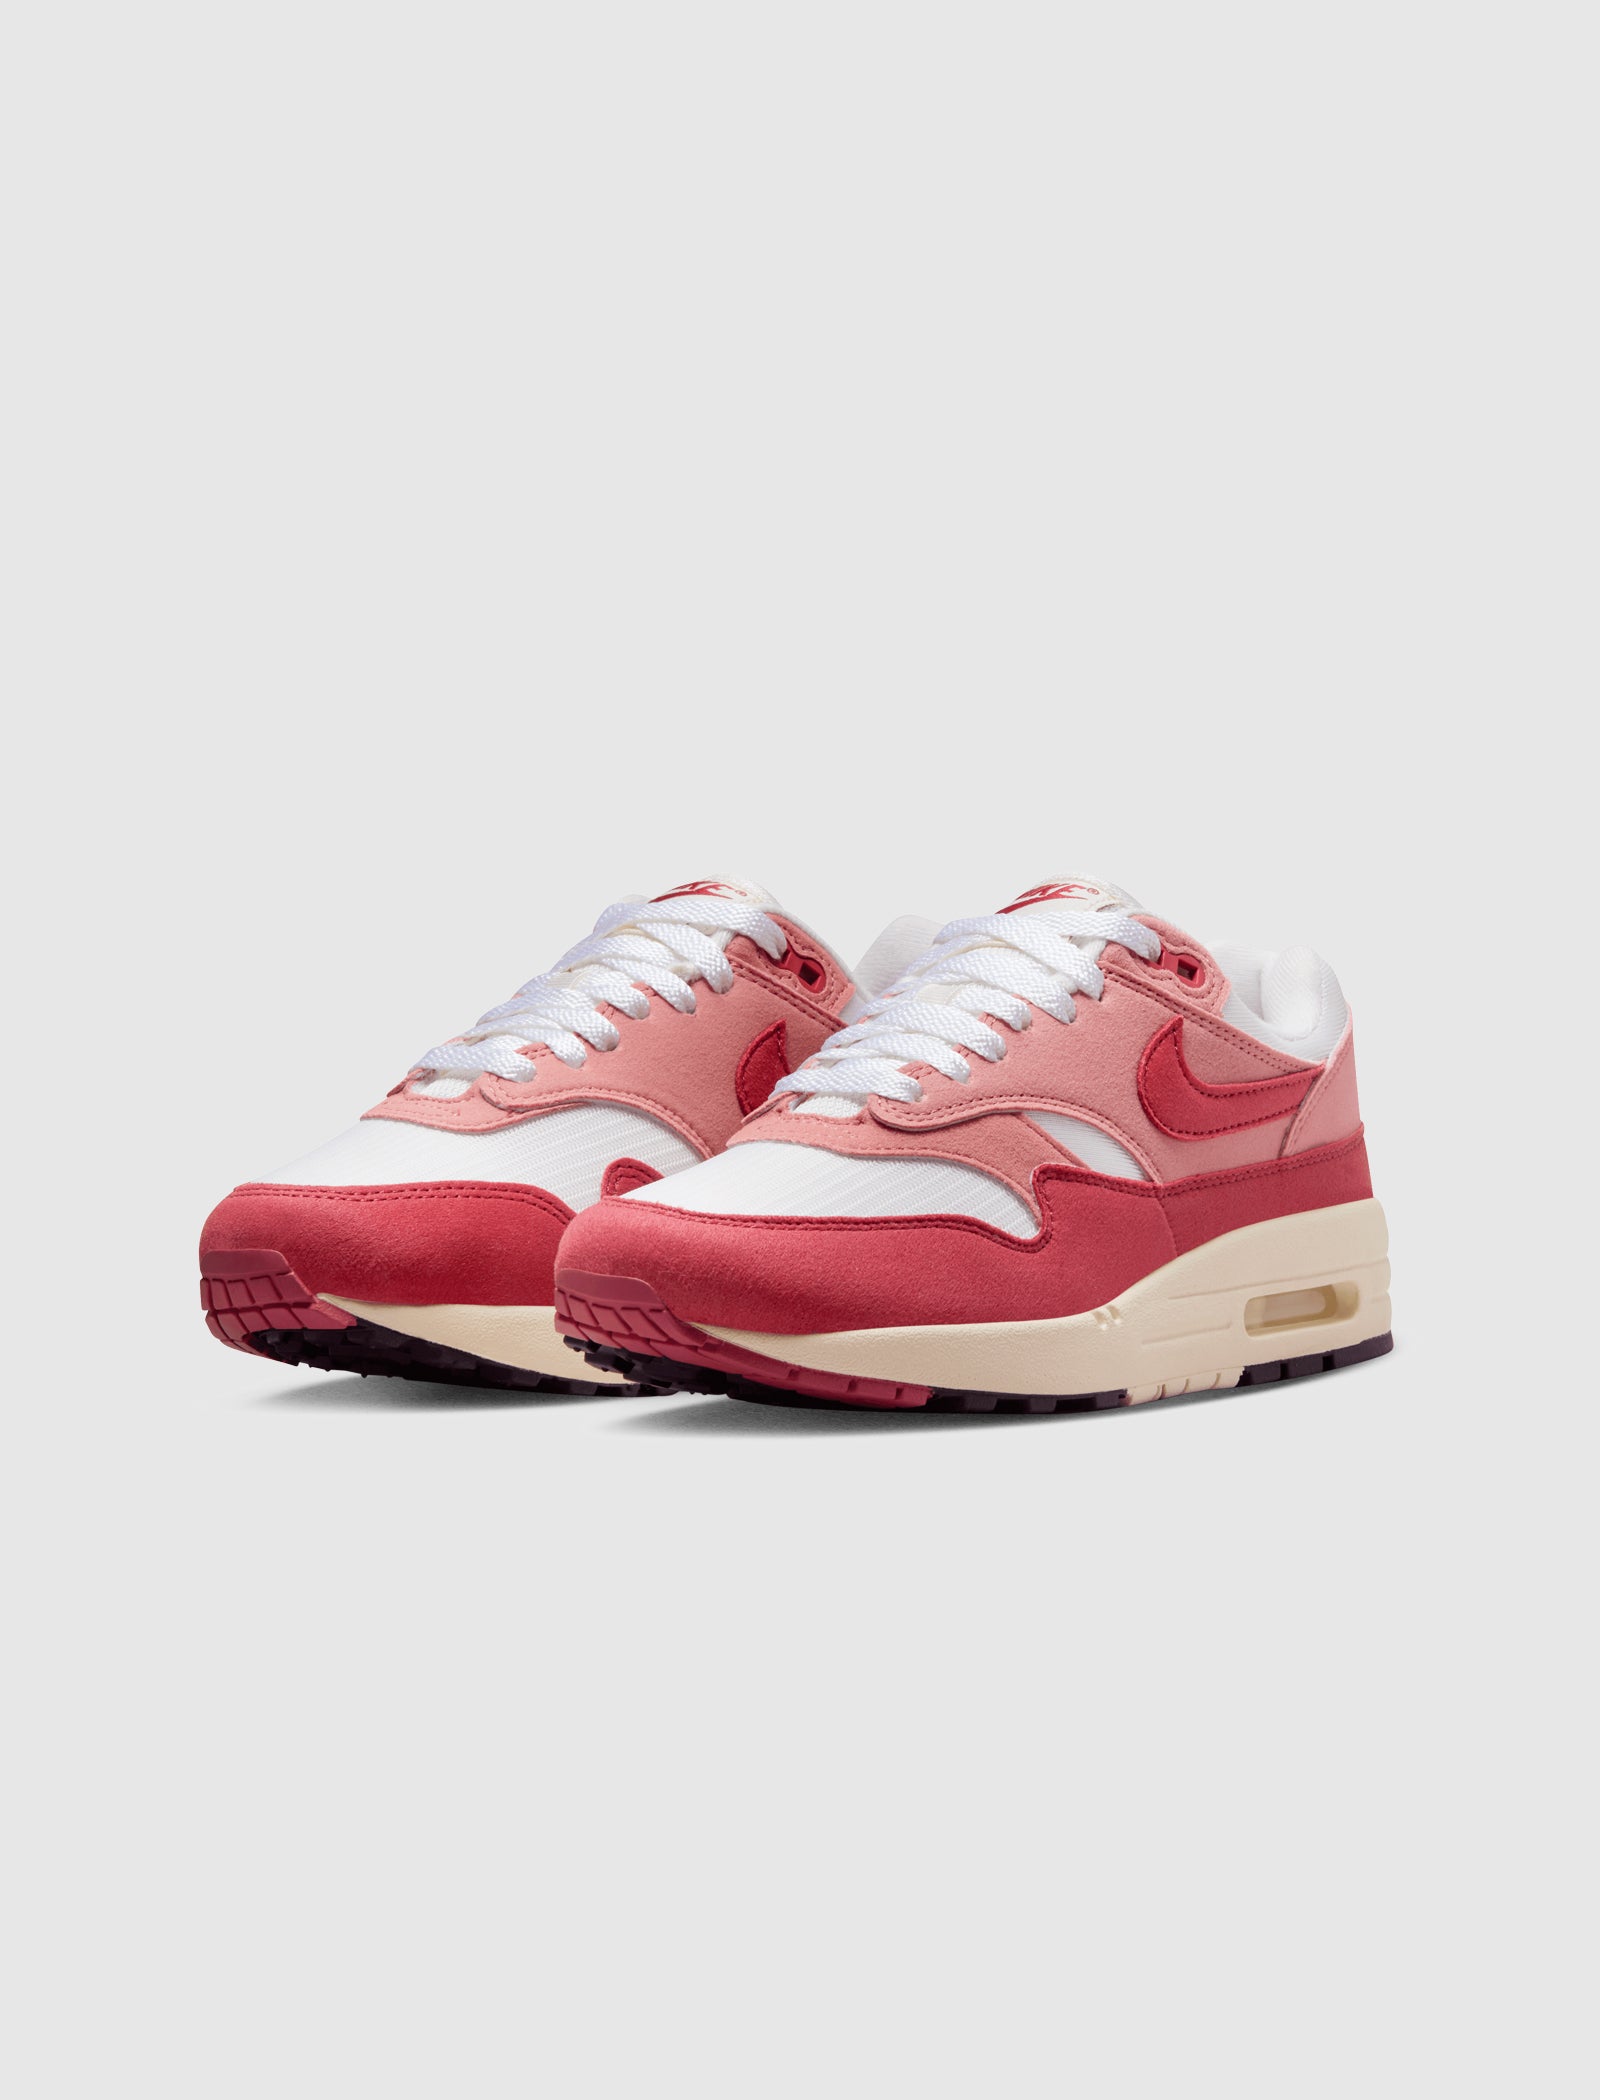 WOMEN'S AIR MAX 1 "RED STARDUST"